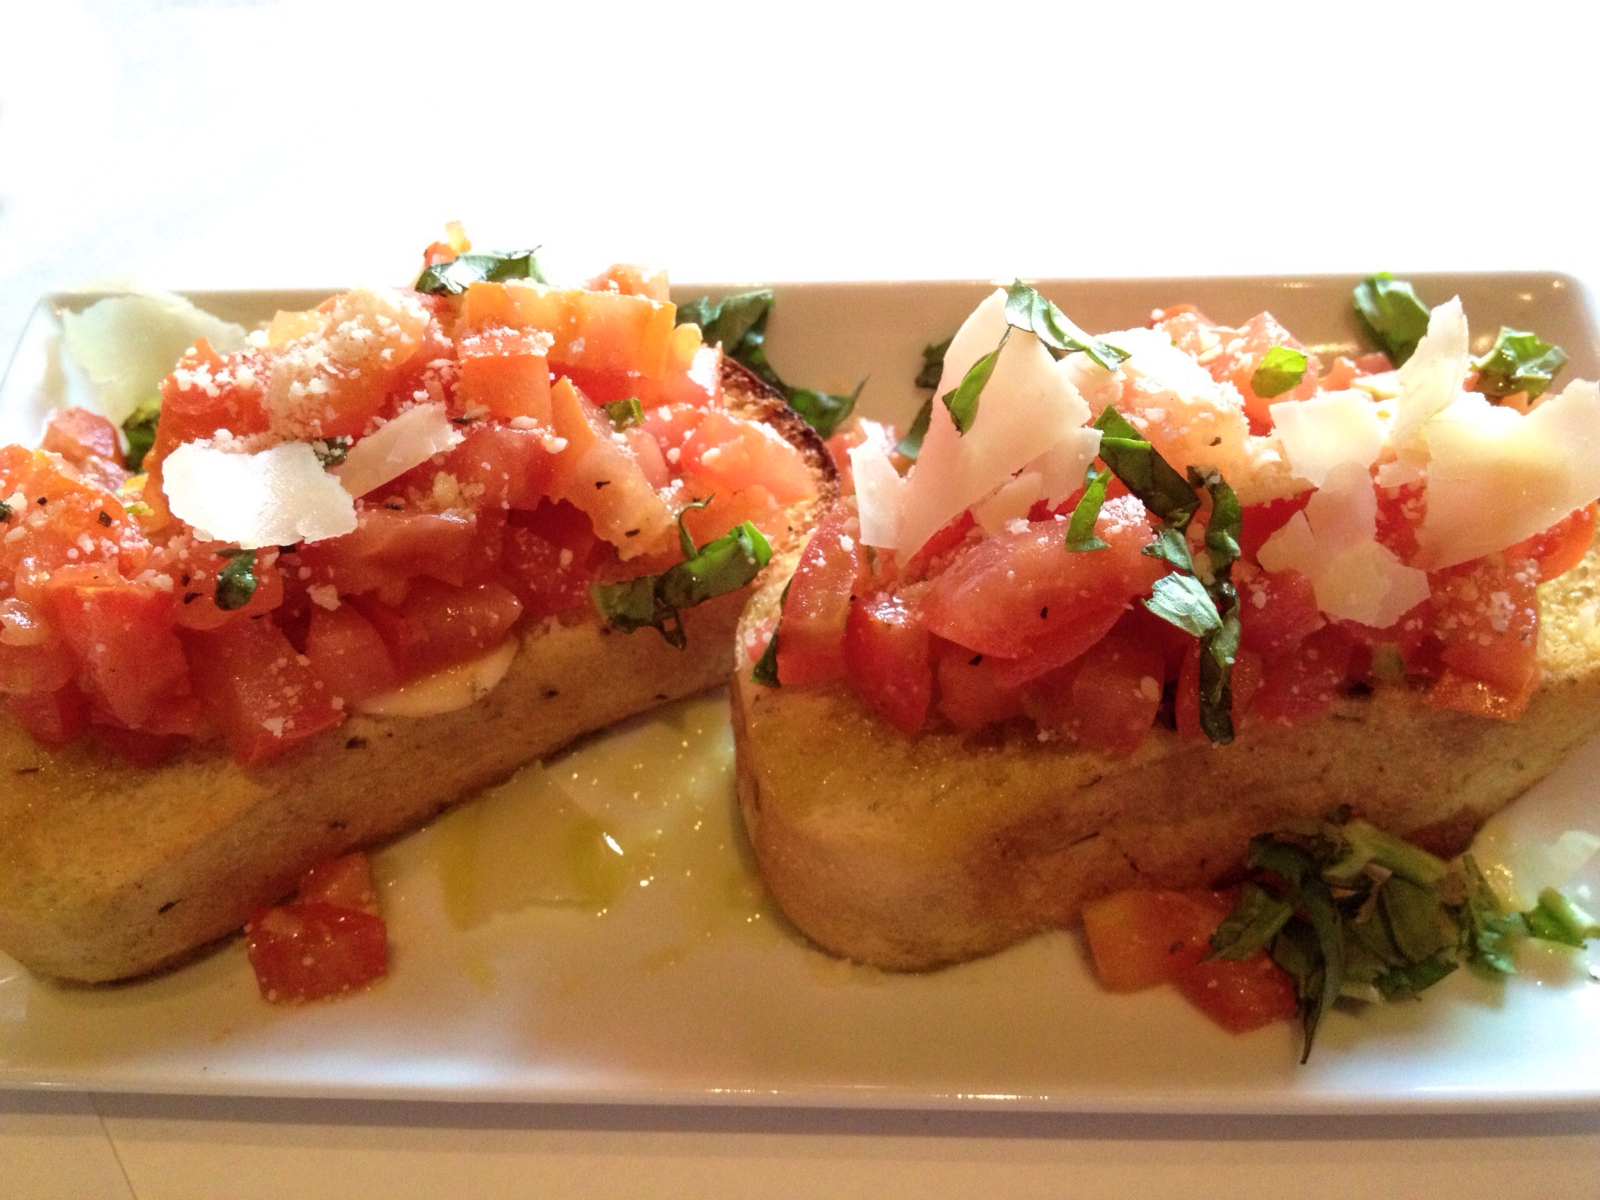 What is the difference between bruschetta and crostini?